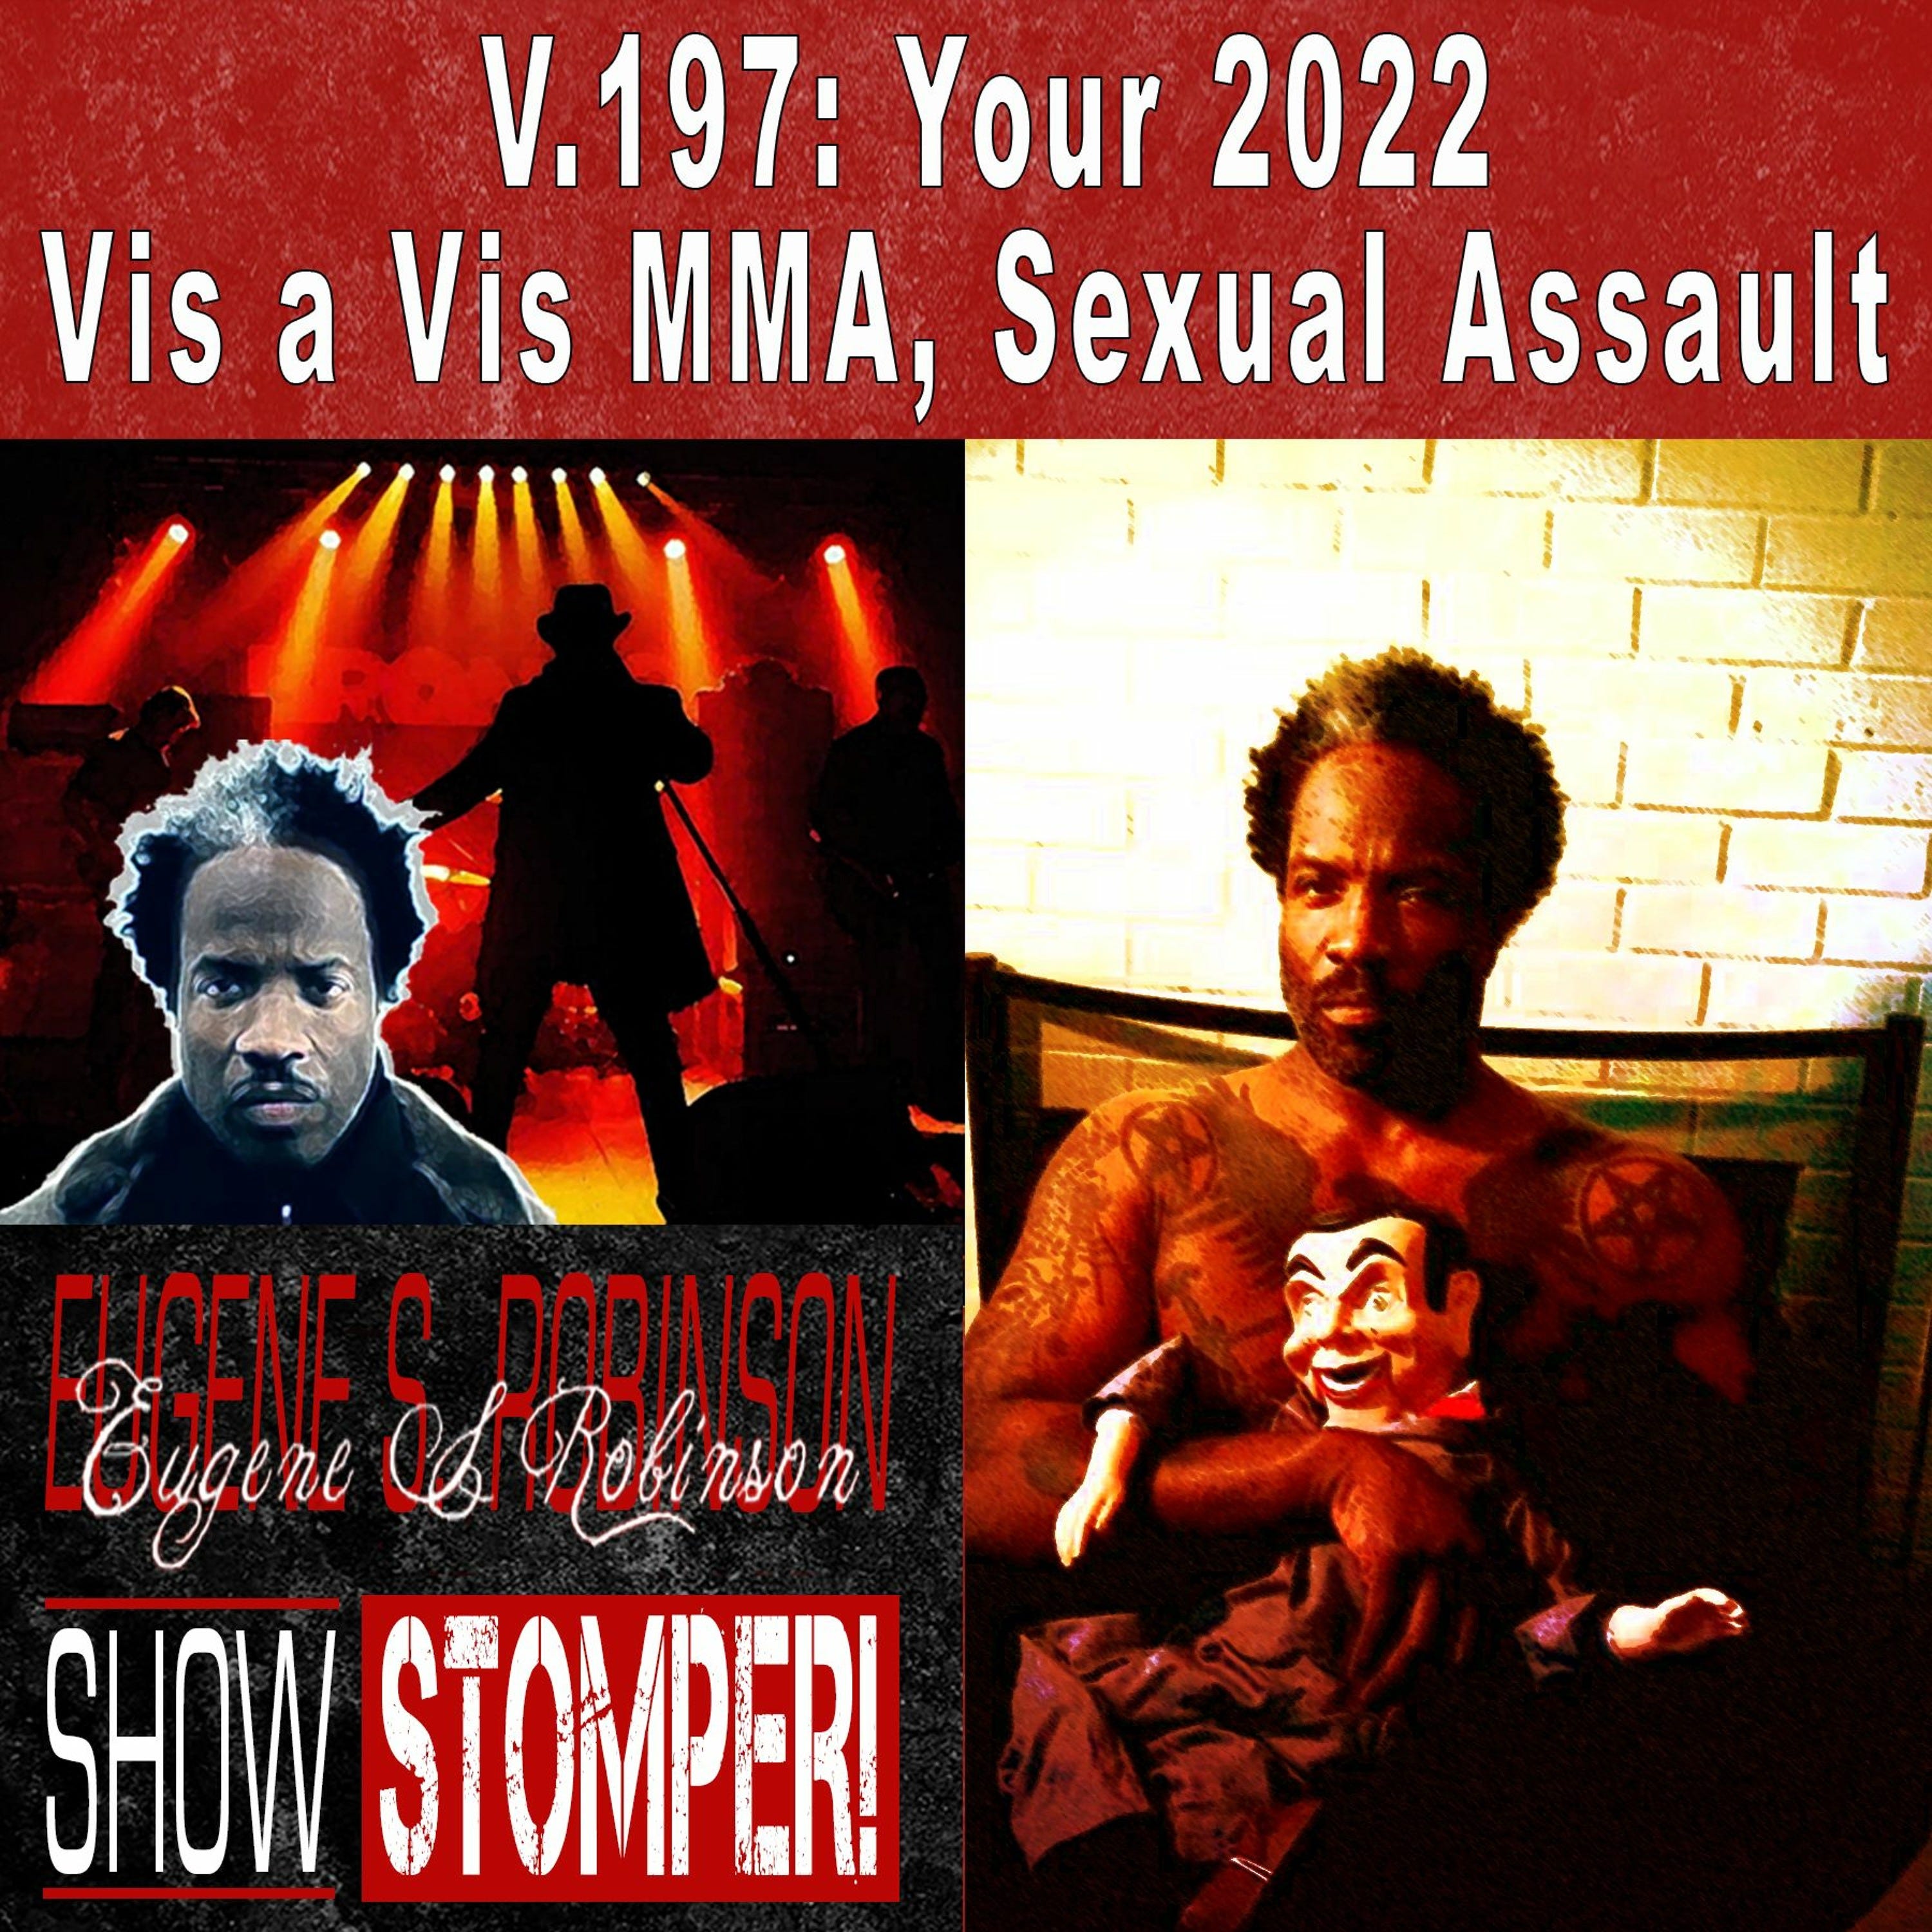 V.197: Your 2022 Vis a Vis MMA, Sexual Assault on The Eugene S. Robinson Show Stomper!